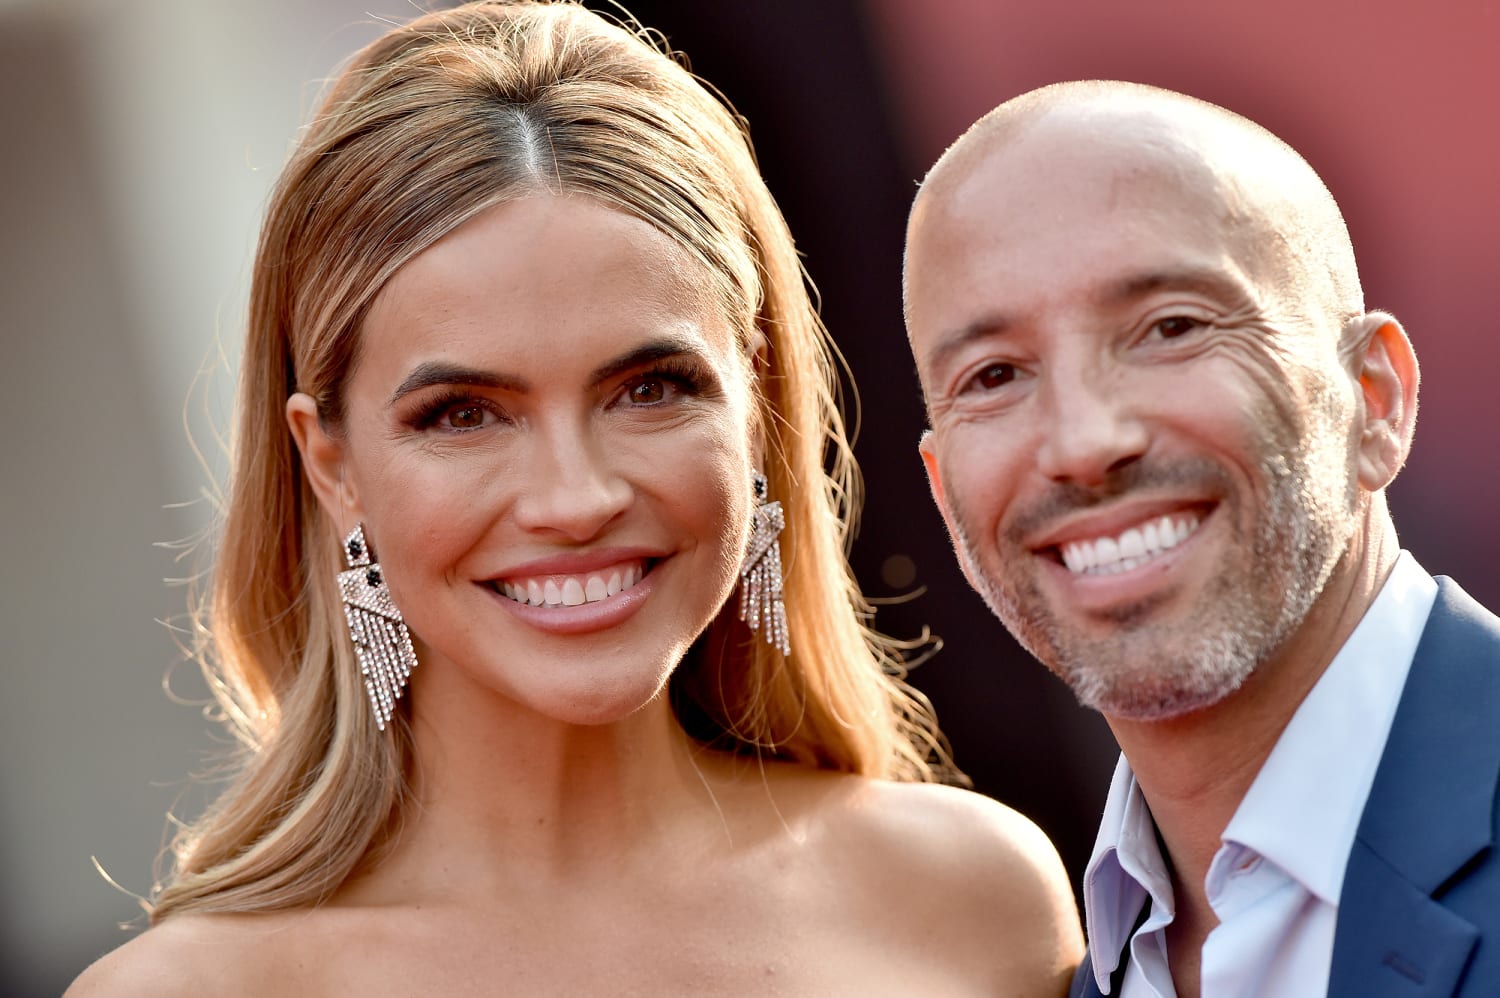 Chrishell Stause and Jason Oppenheim's Relationship and Breakup